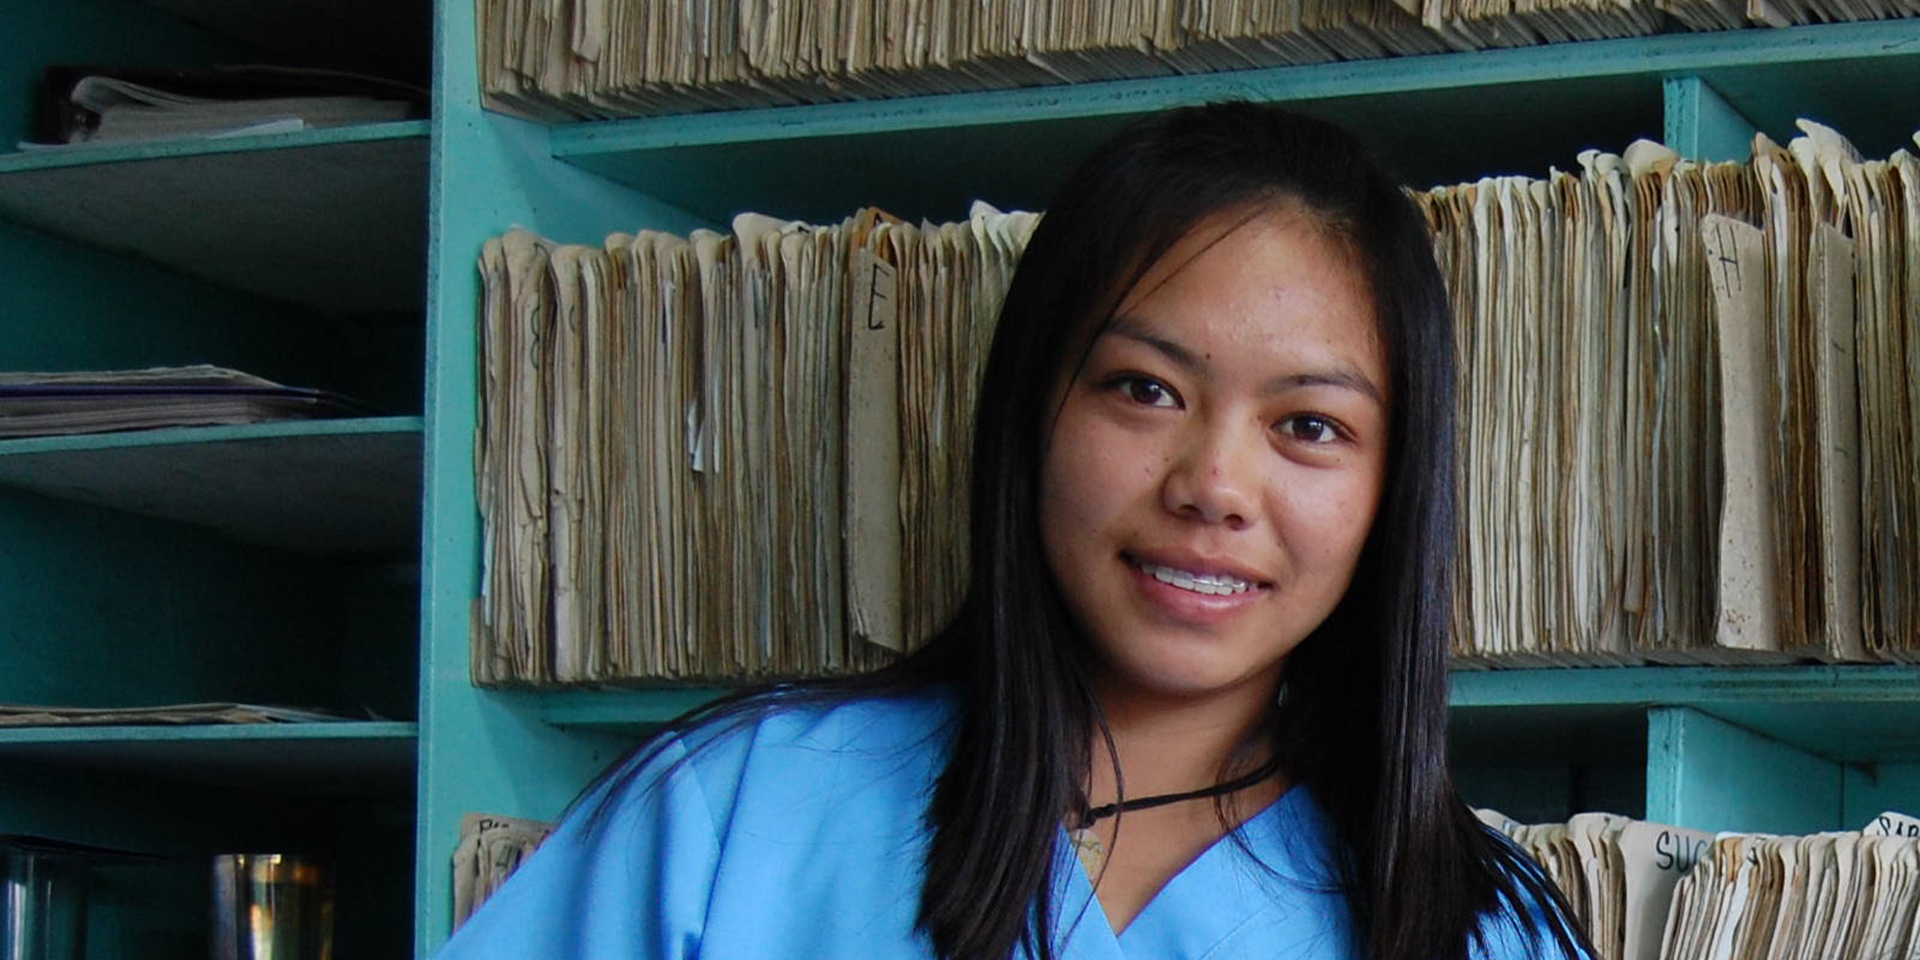 Image of a young female health care worker smiling in front of a shelf filled with manilla files.